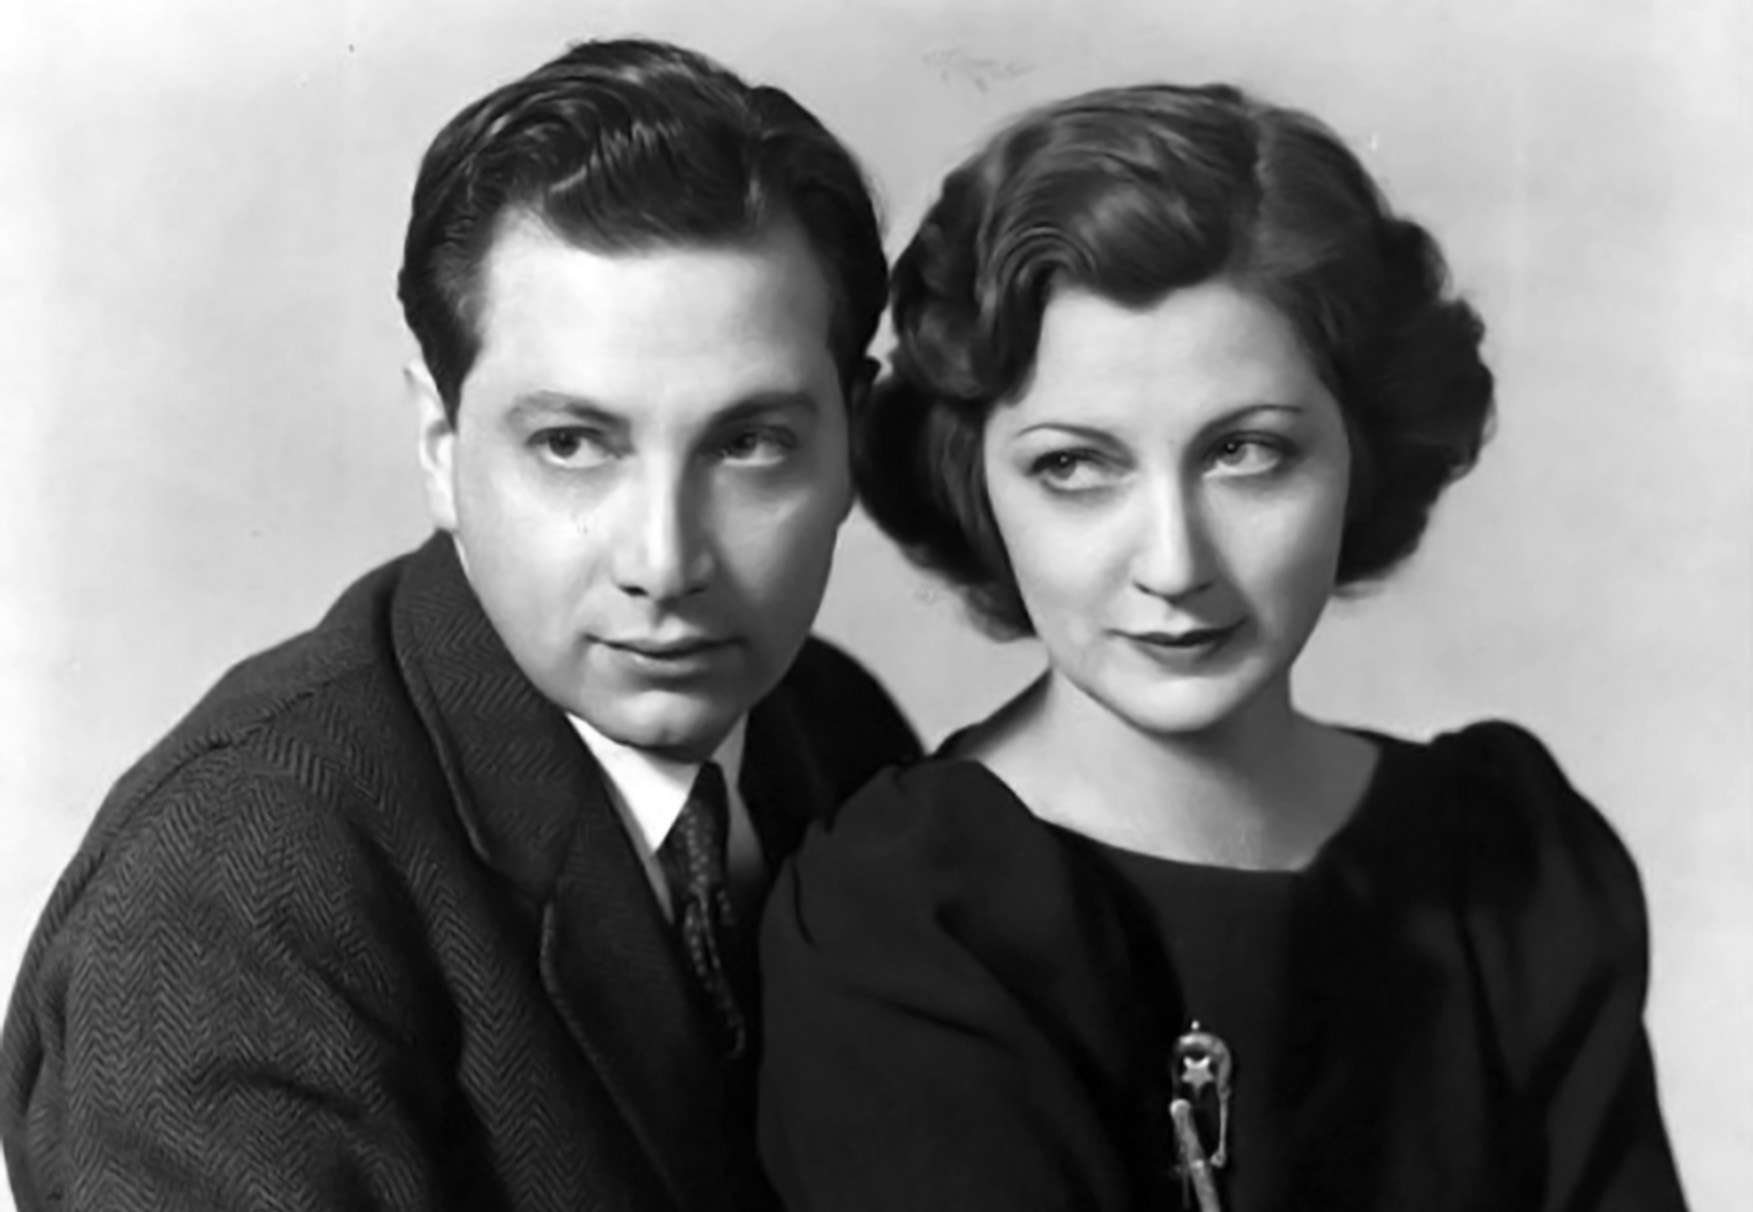 Black-and-white photo showing a glamorous man and woman sitting close together, both wearing dark formal clothing